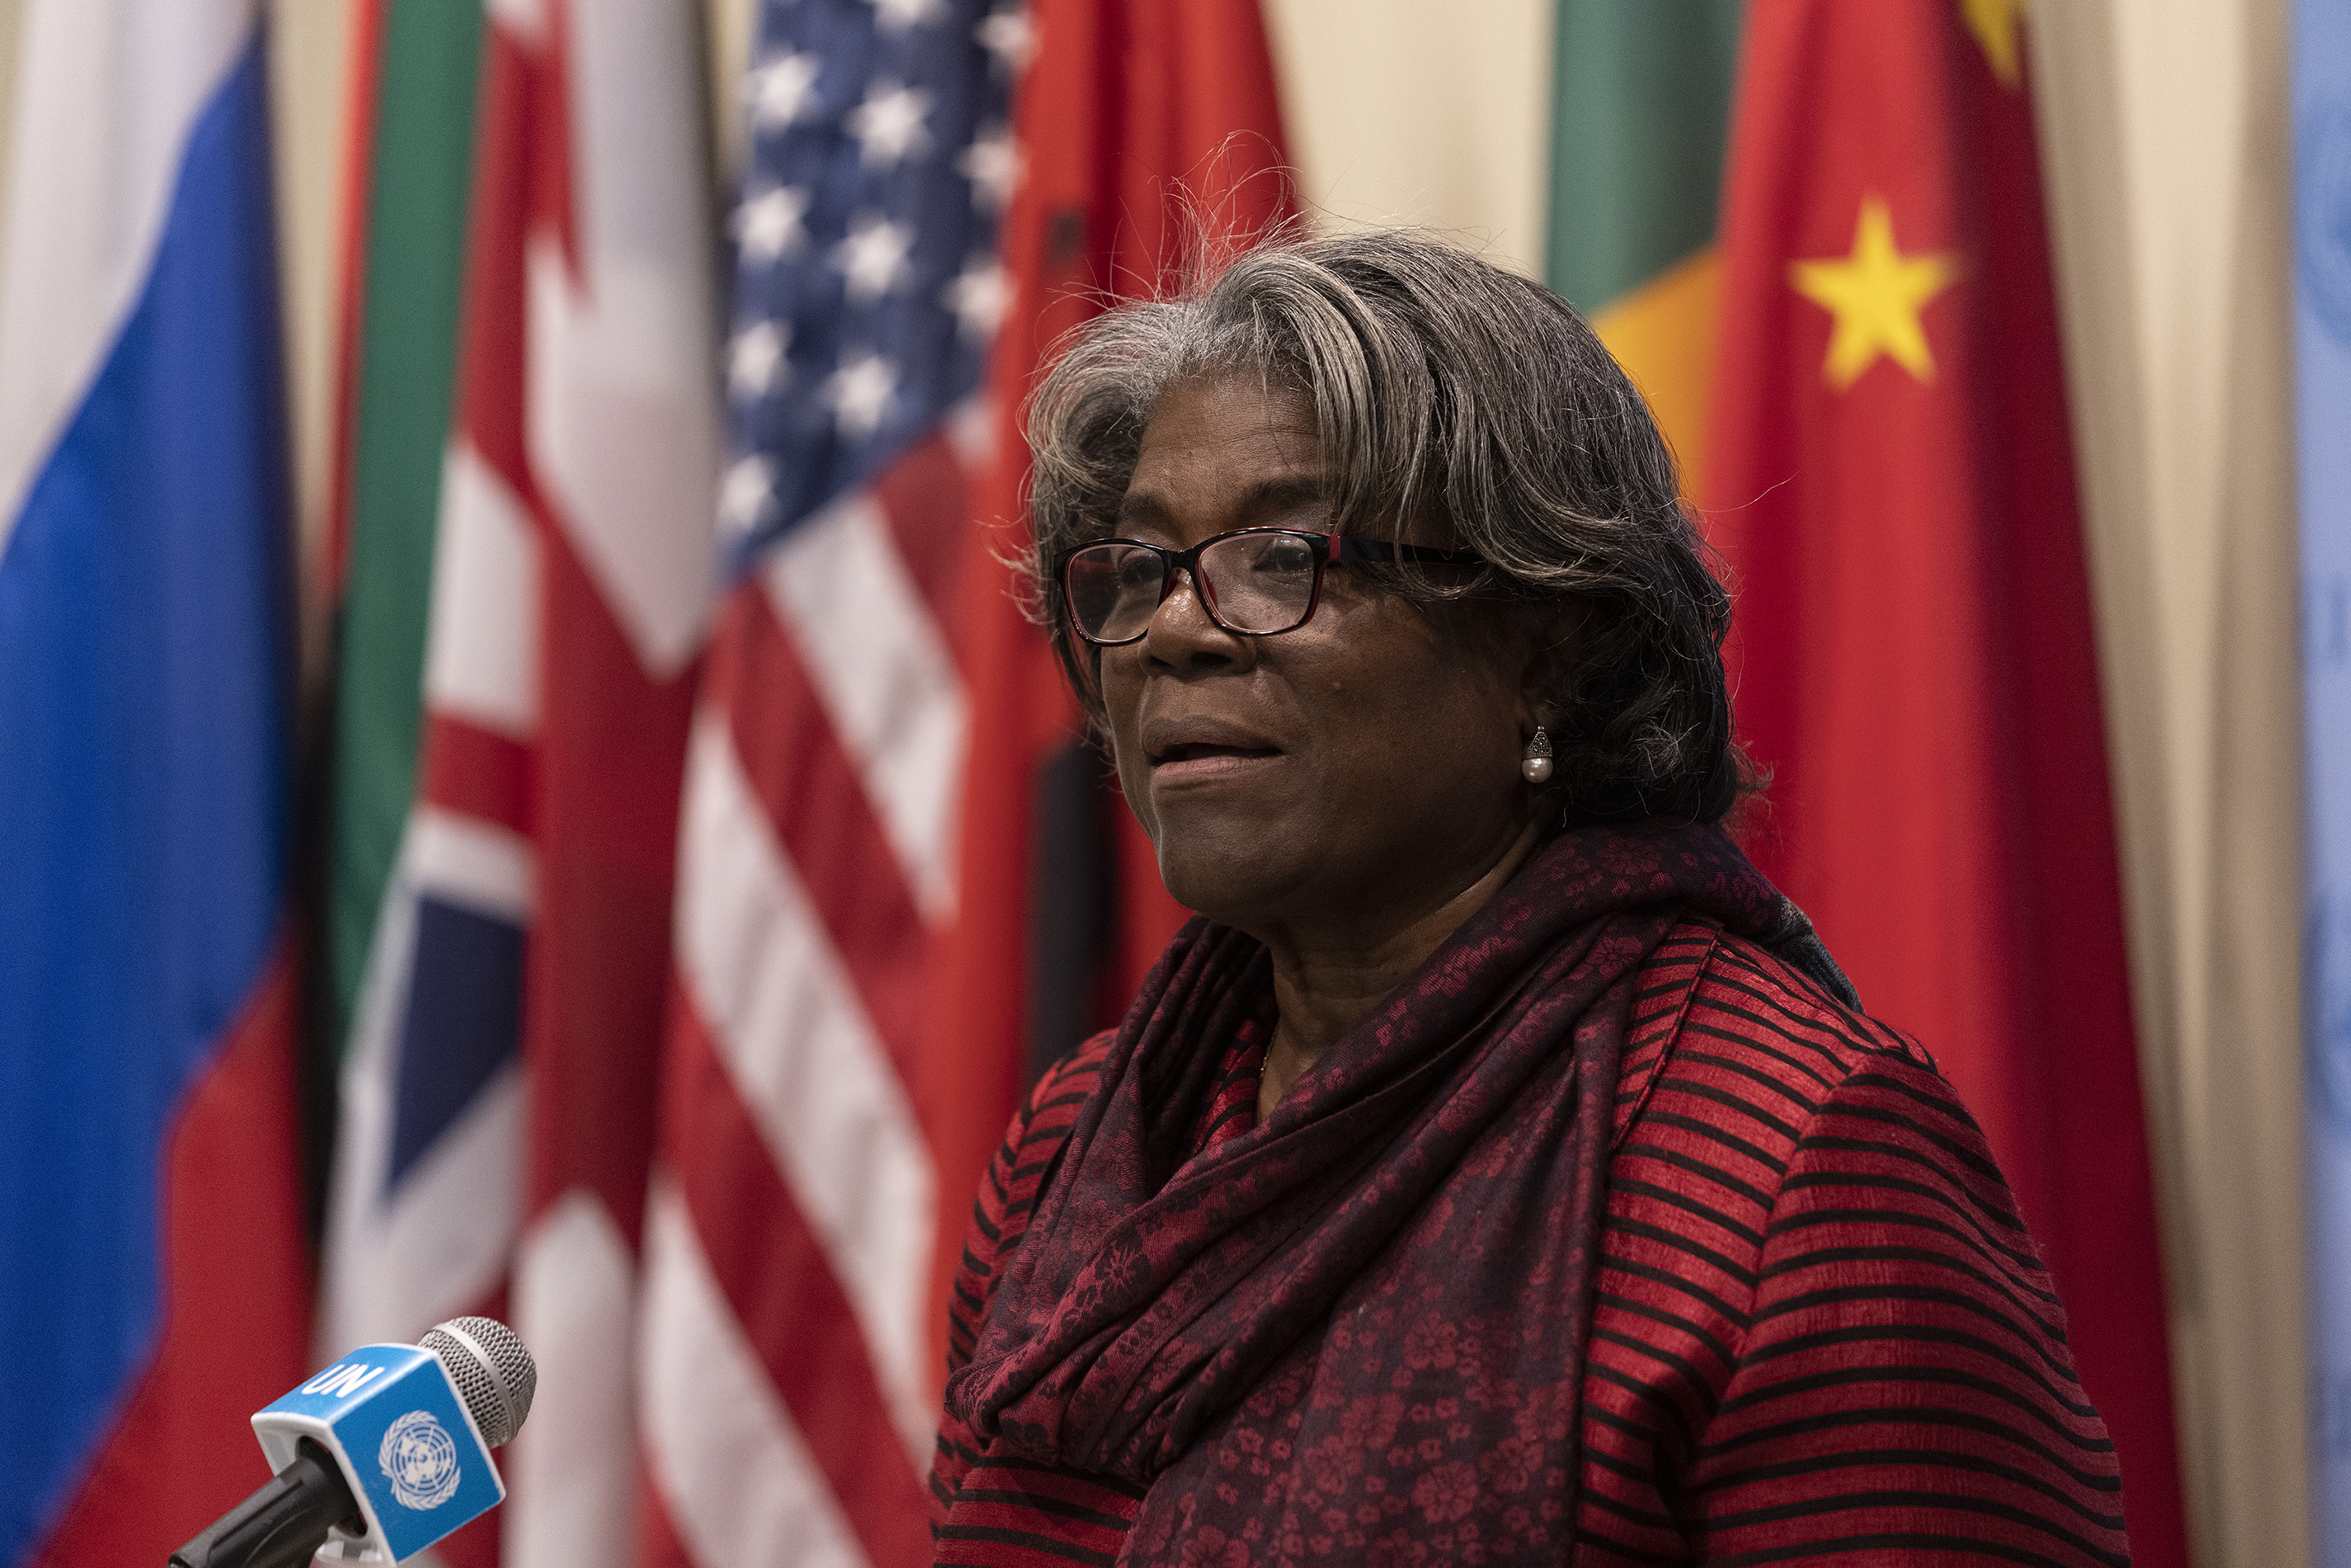 US Ambassador to the United Nations Linda Thomas-Greenfield speaks to press after Security Council meeting in the UN Headquarters in New York on October 1.